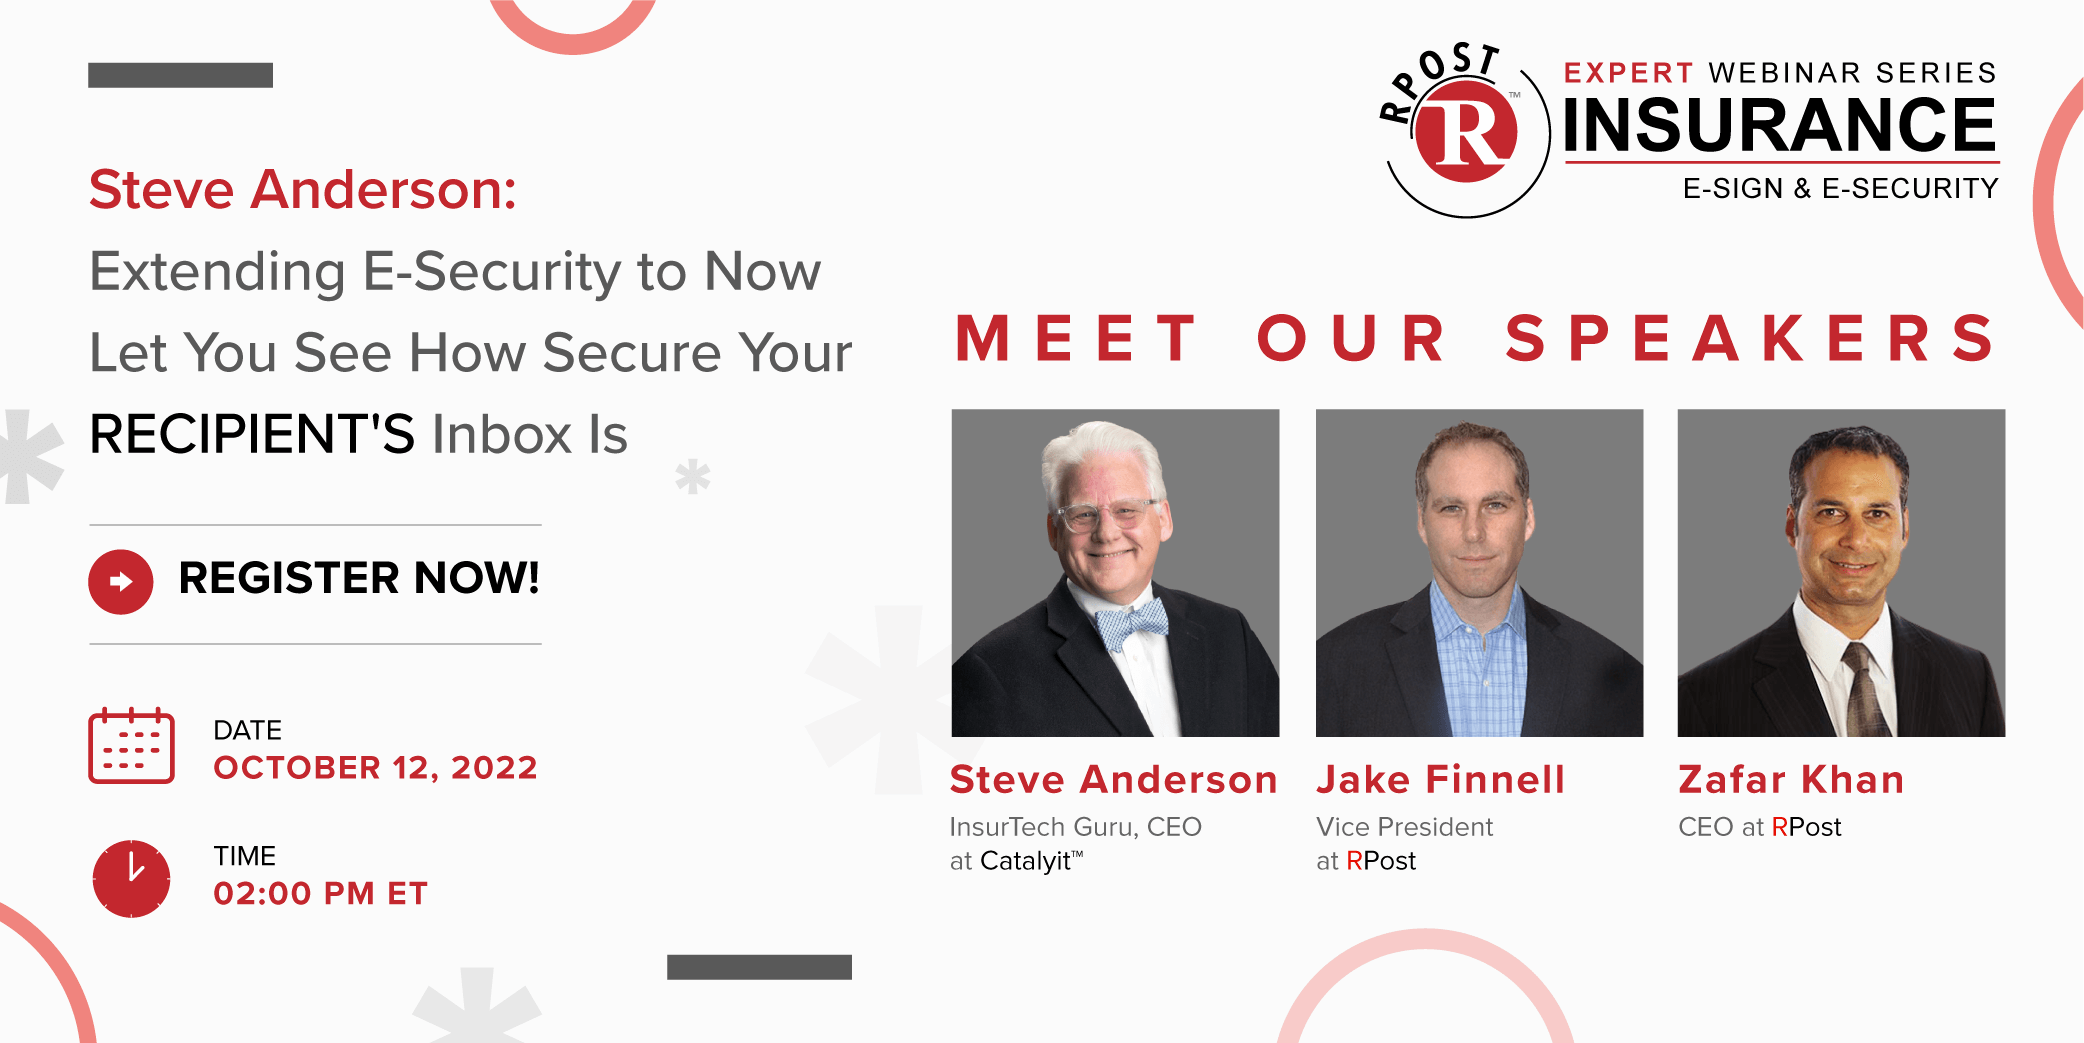 Steve Anderson: Extending E-Security to Now Let You See How Secure Your RECIPIENT'S Inbox Is